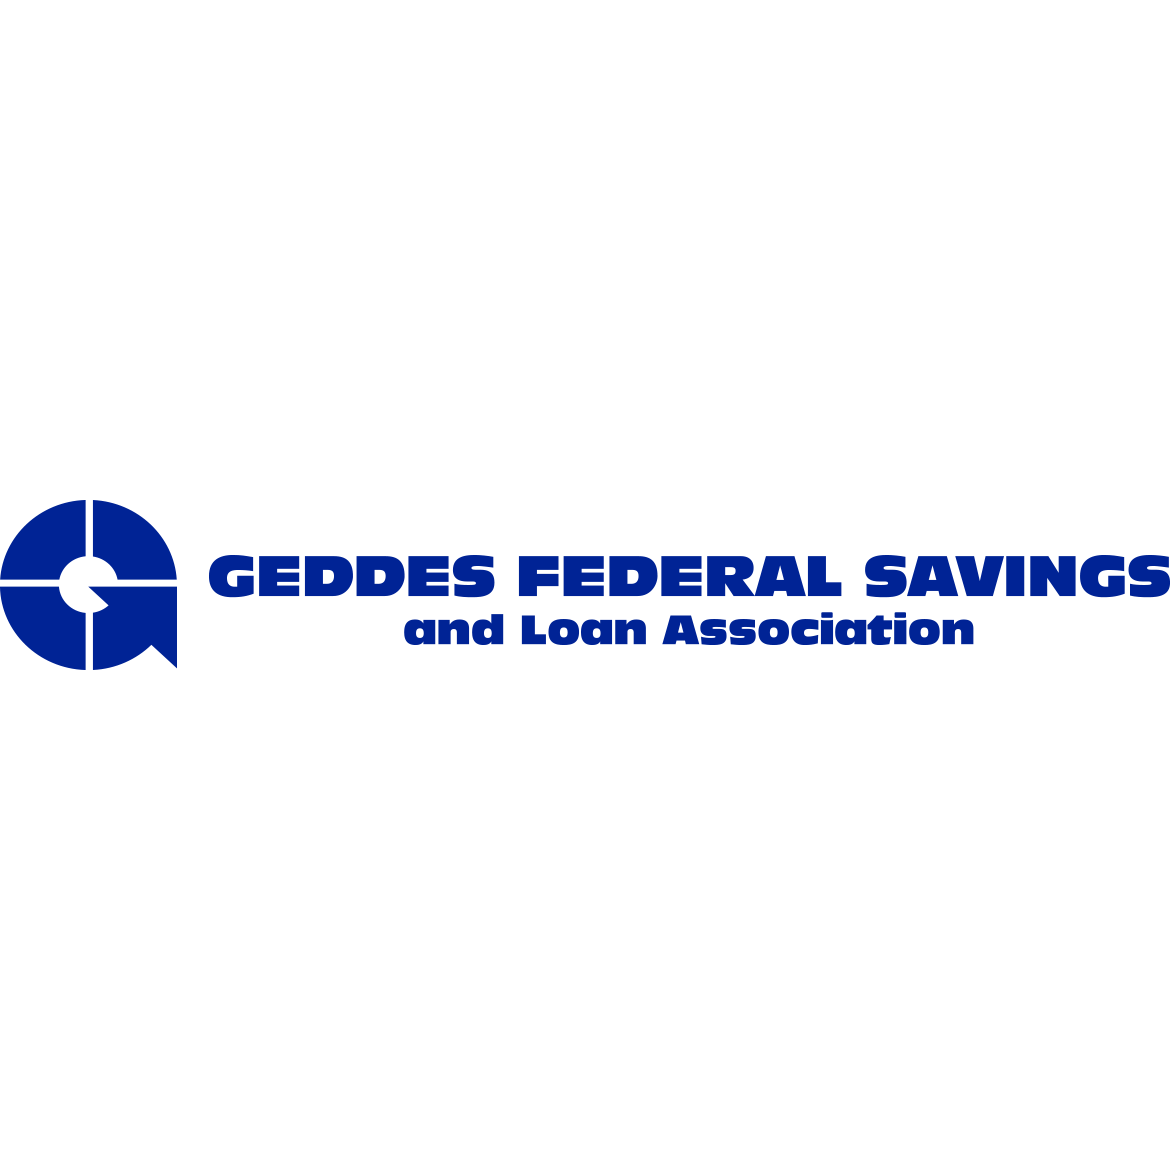 Geddes Federal Savings and Loan Association Photo